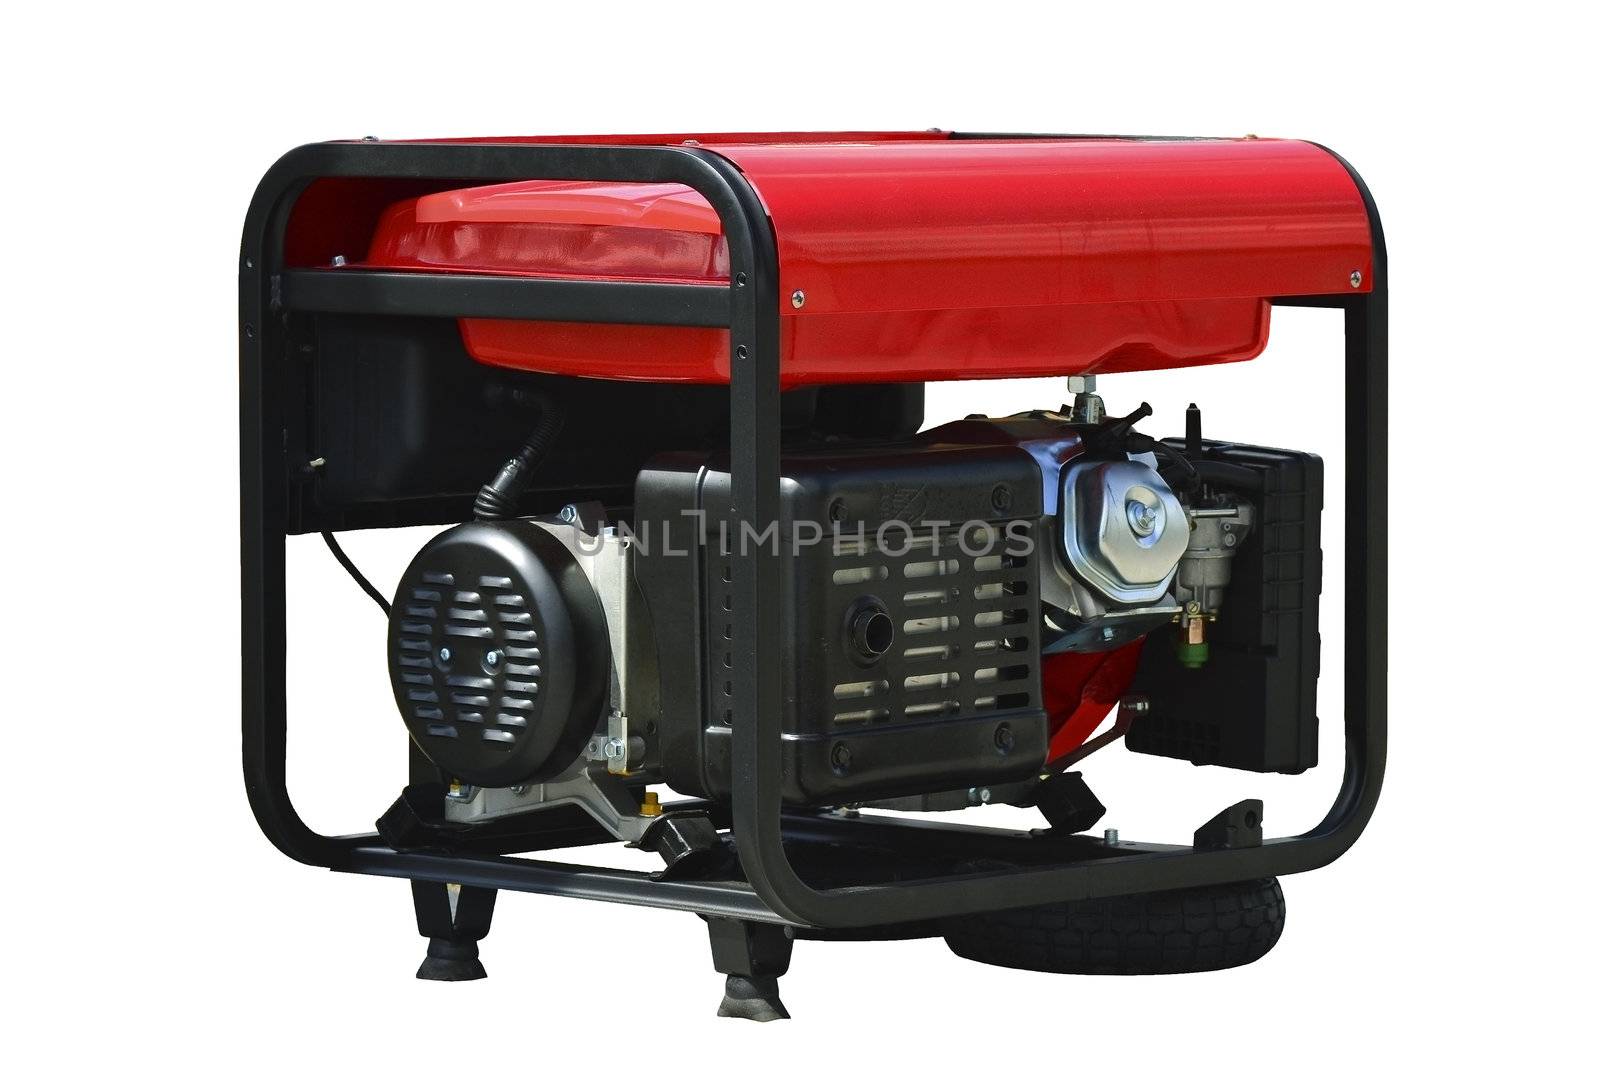 Portable fuel electricity generator, isolated on white background.